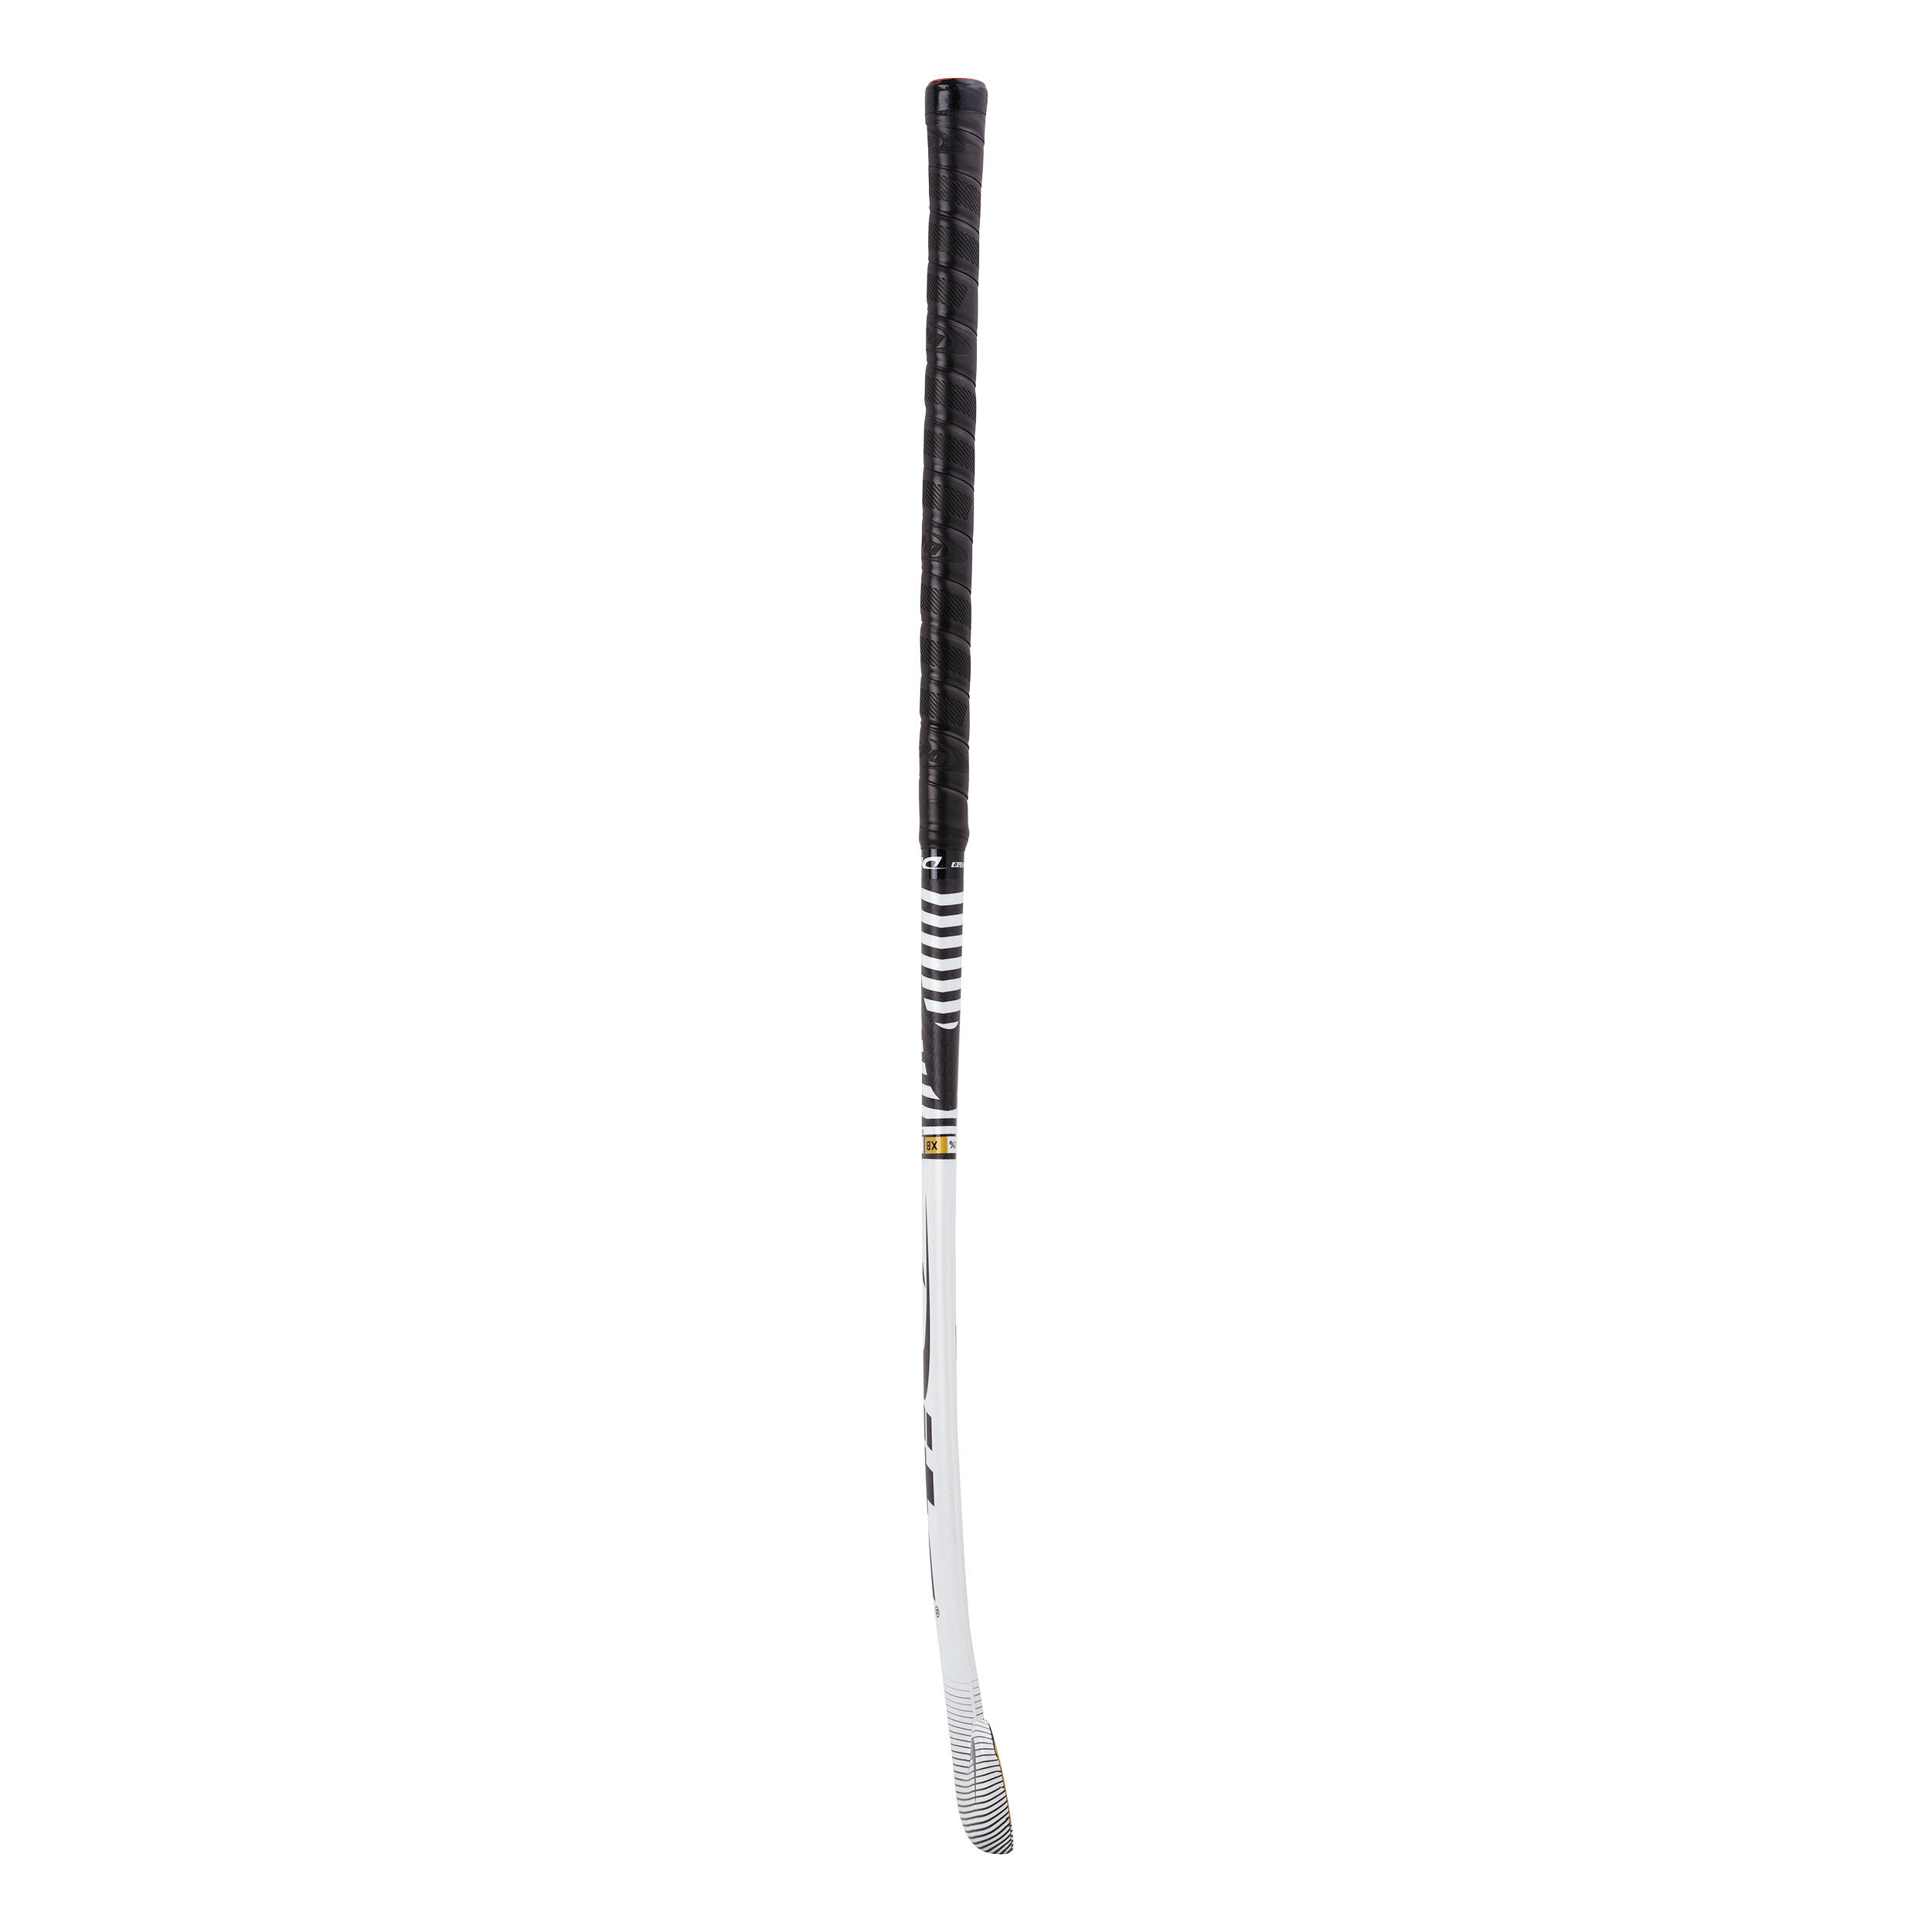 Adult Field Hockey Advanced 60% Carbon X-Low Bow Stick CompotecC60 - White/Black 12/12